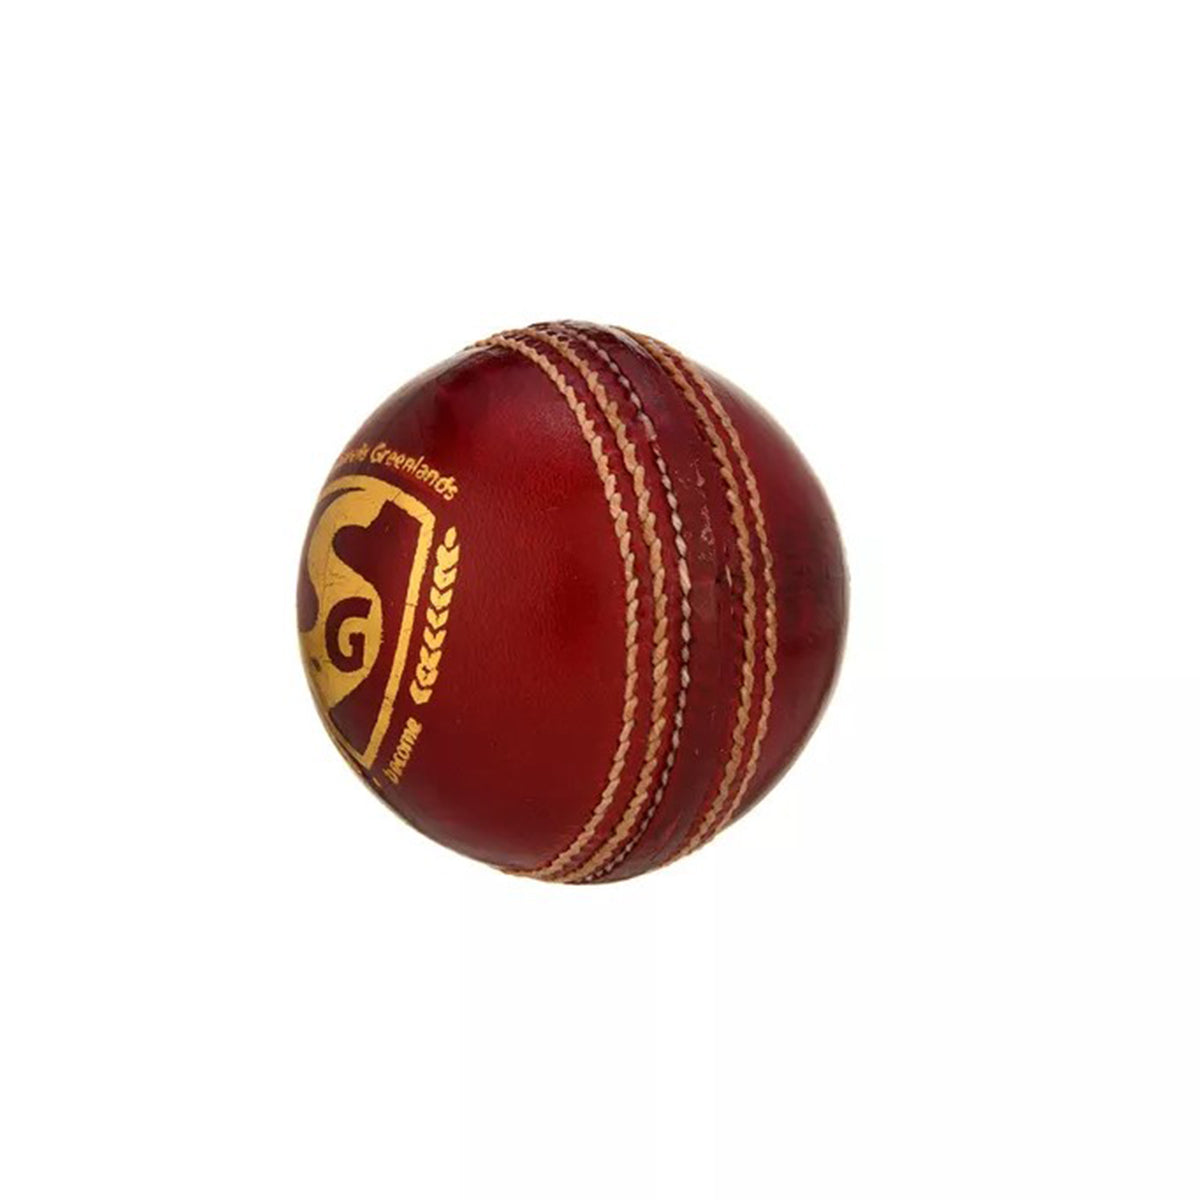 SG Test Red Leather Cricket Ball